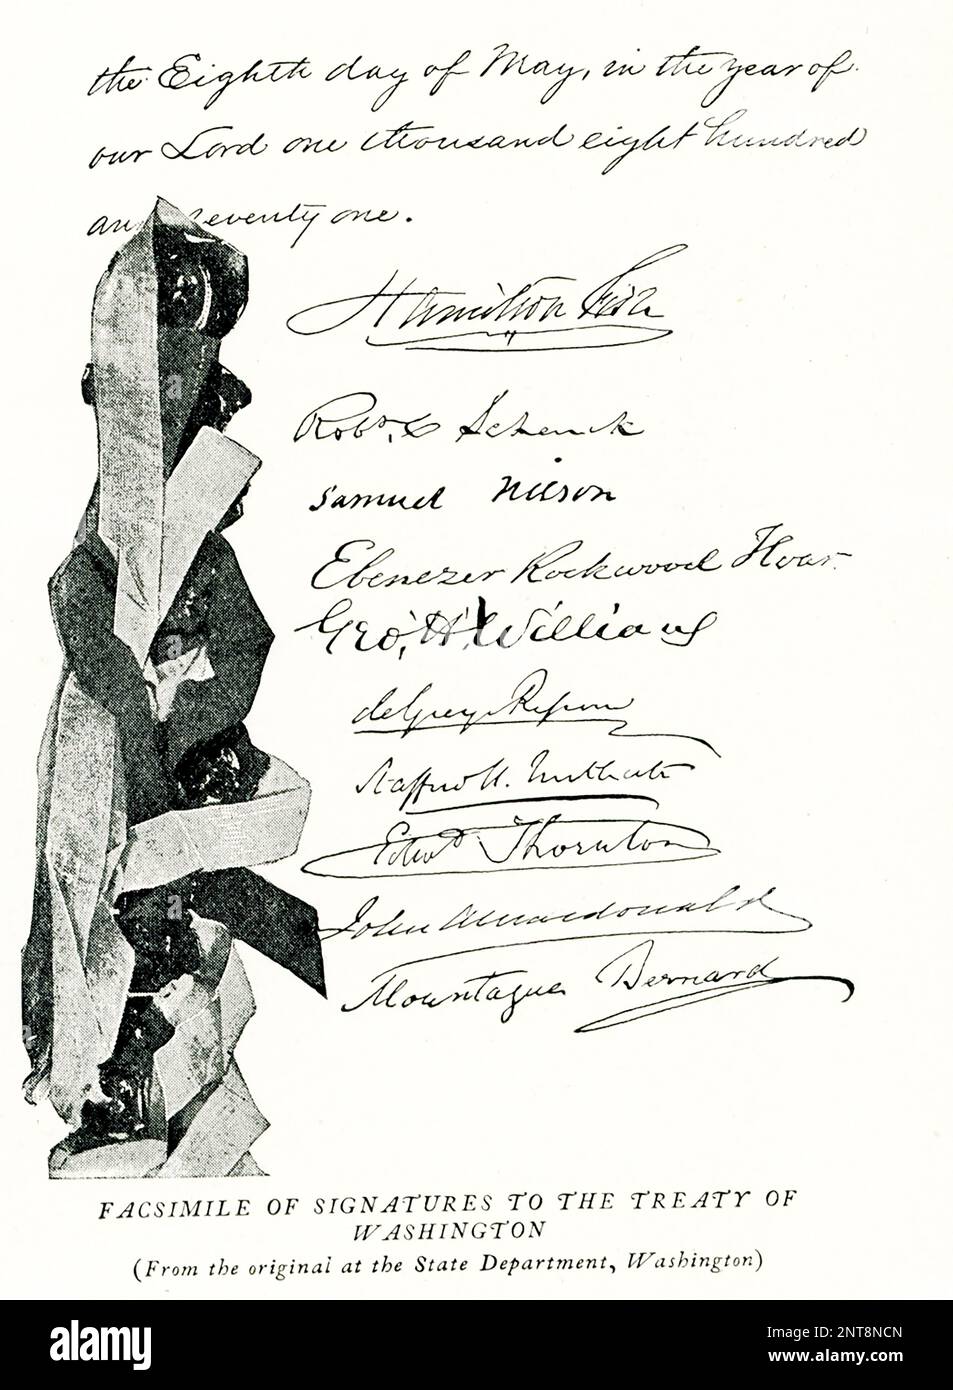 The caption for this 1896 illustration reads: 'Facsimile of Signatures to the Treaty of Washington (from the original at the State Department, Washington)' The Treaty of Washington was a treaty signed and ratified by the United Kingdom and the United States in 1871 during the first premiership of William Gladstone and the presidency of Ulysses S. Grant. It was meant to resolve a number of conflicts between the two nations. One of these was the death of many British civilians during the American Civil War even though Britain had remained neutral during the war, Stock Photo